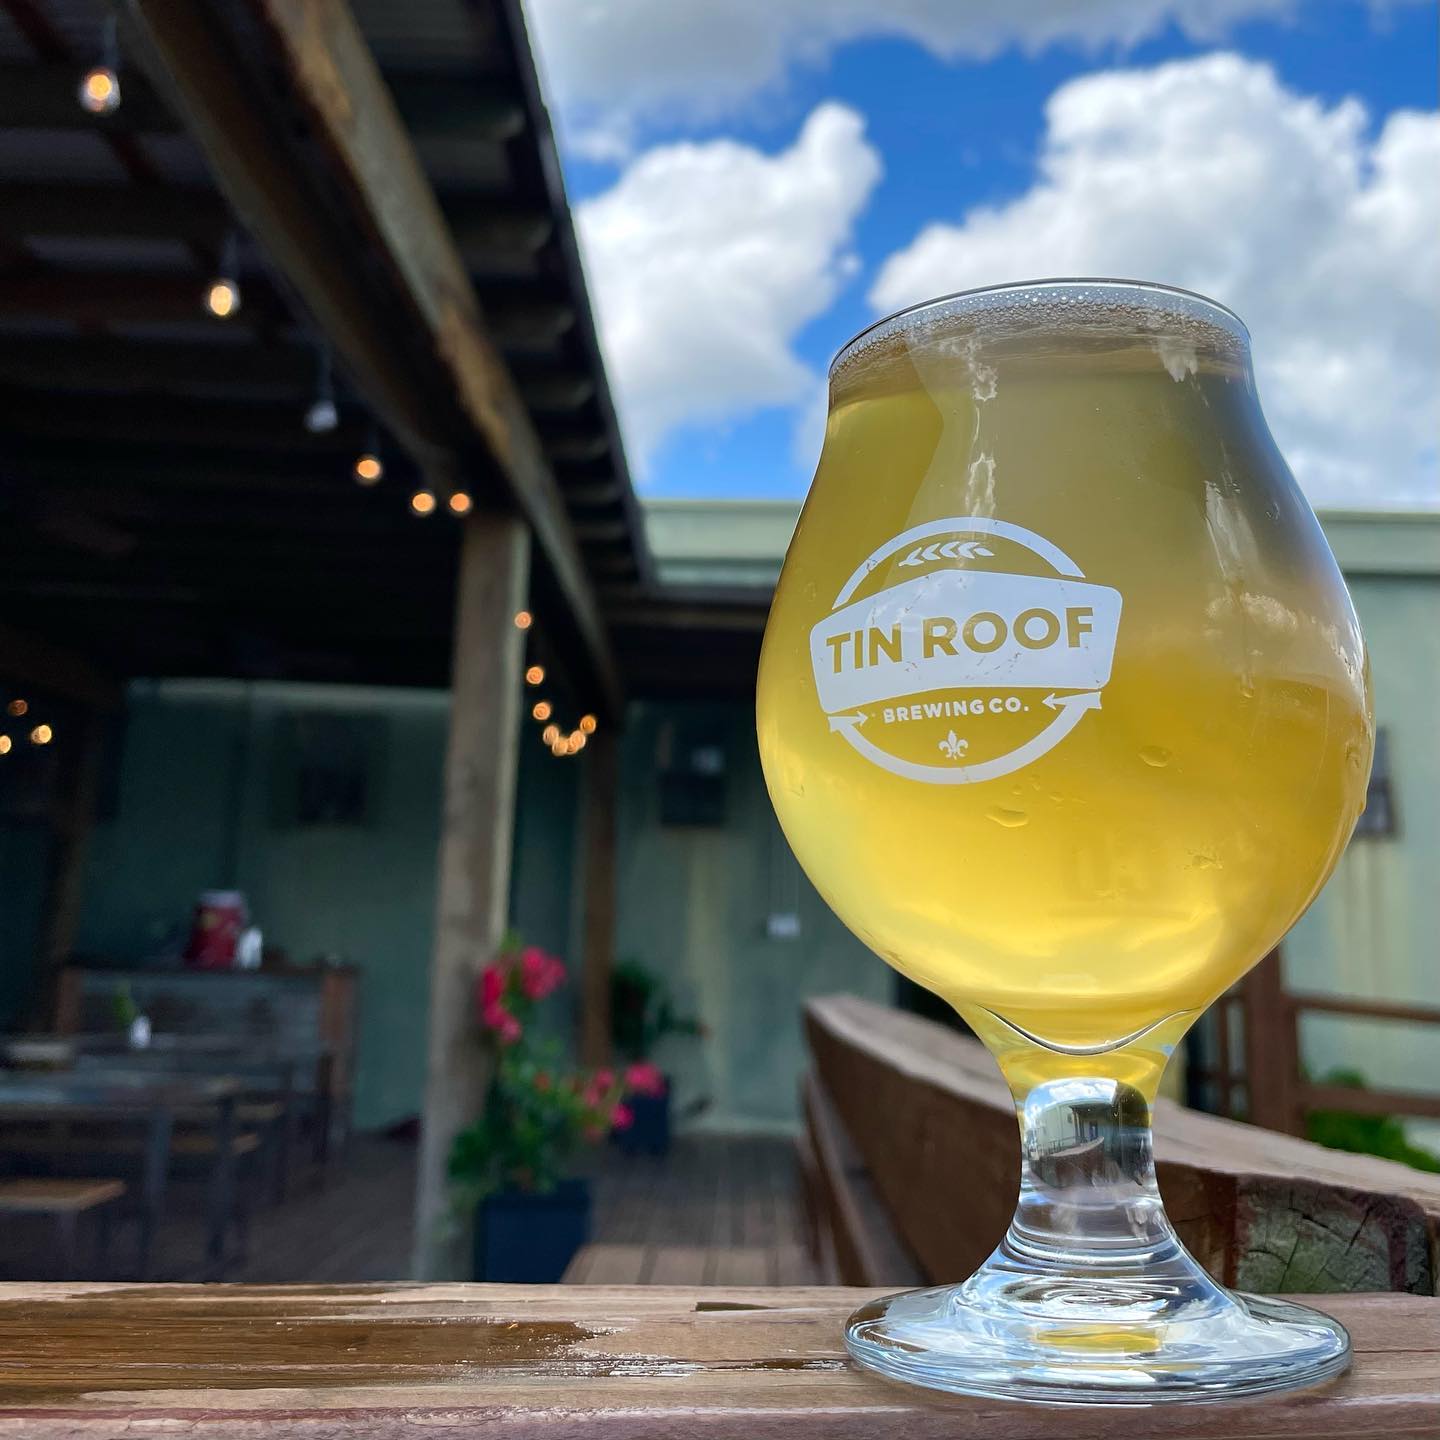 Tin Roof Brewing